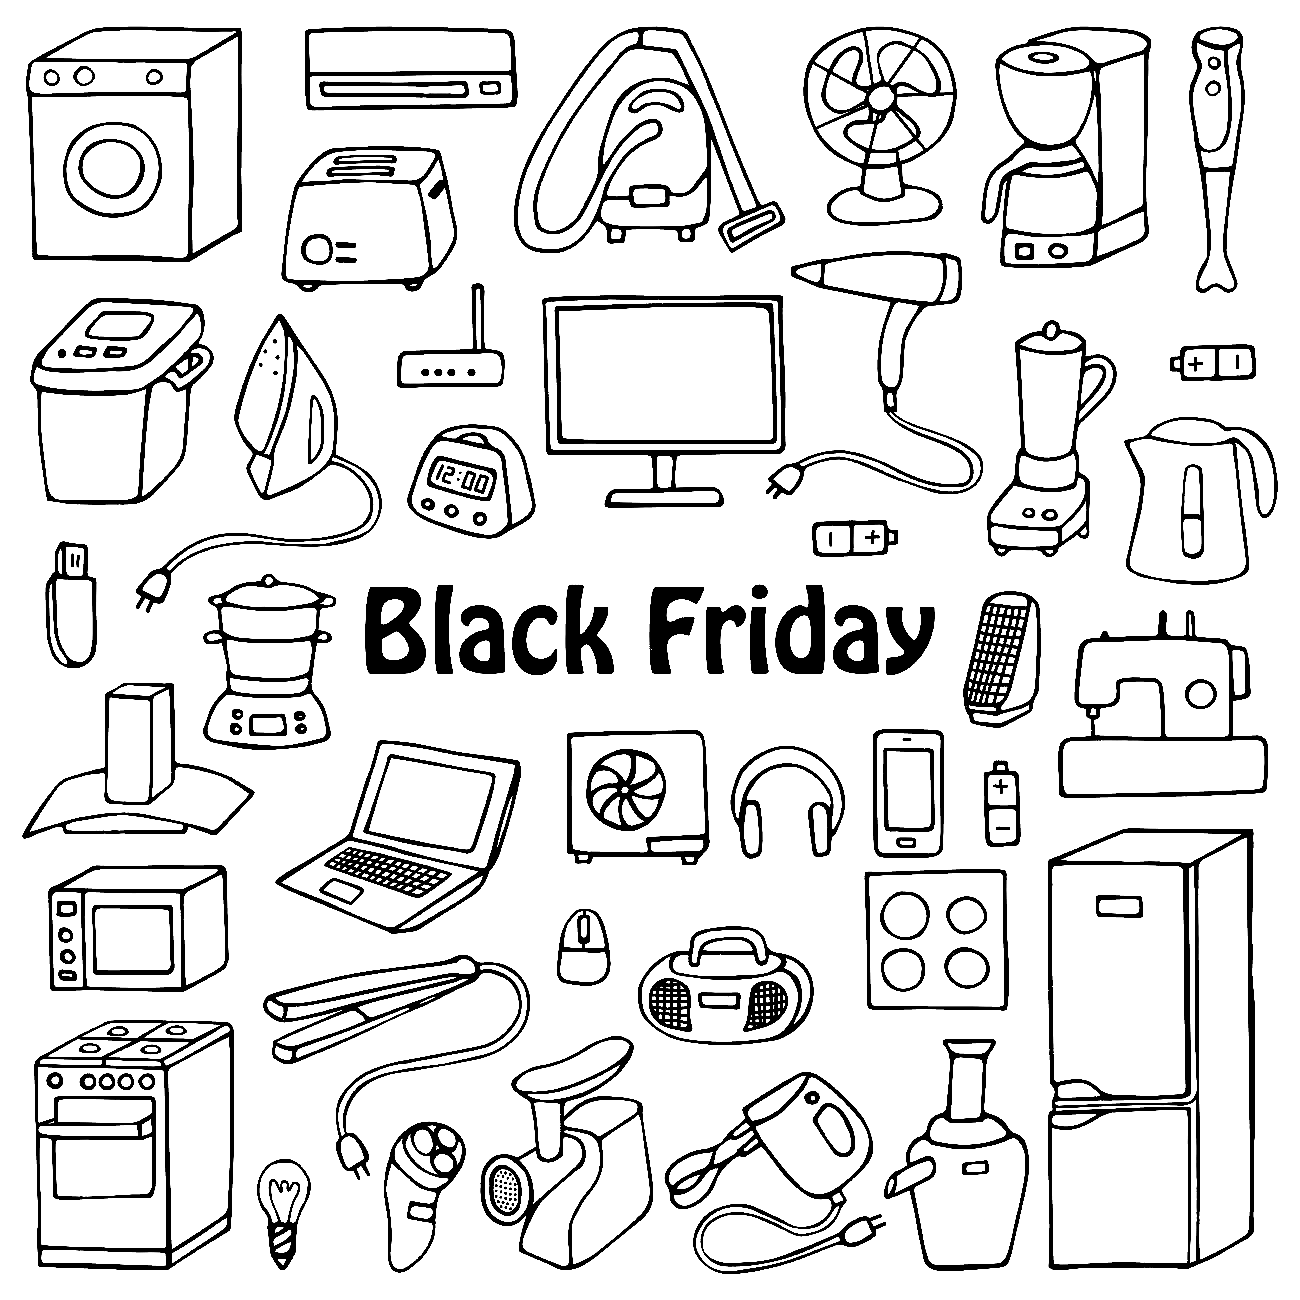 Black Friday Household Appliances Coloring Pages